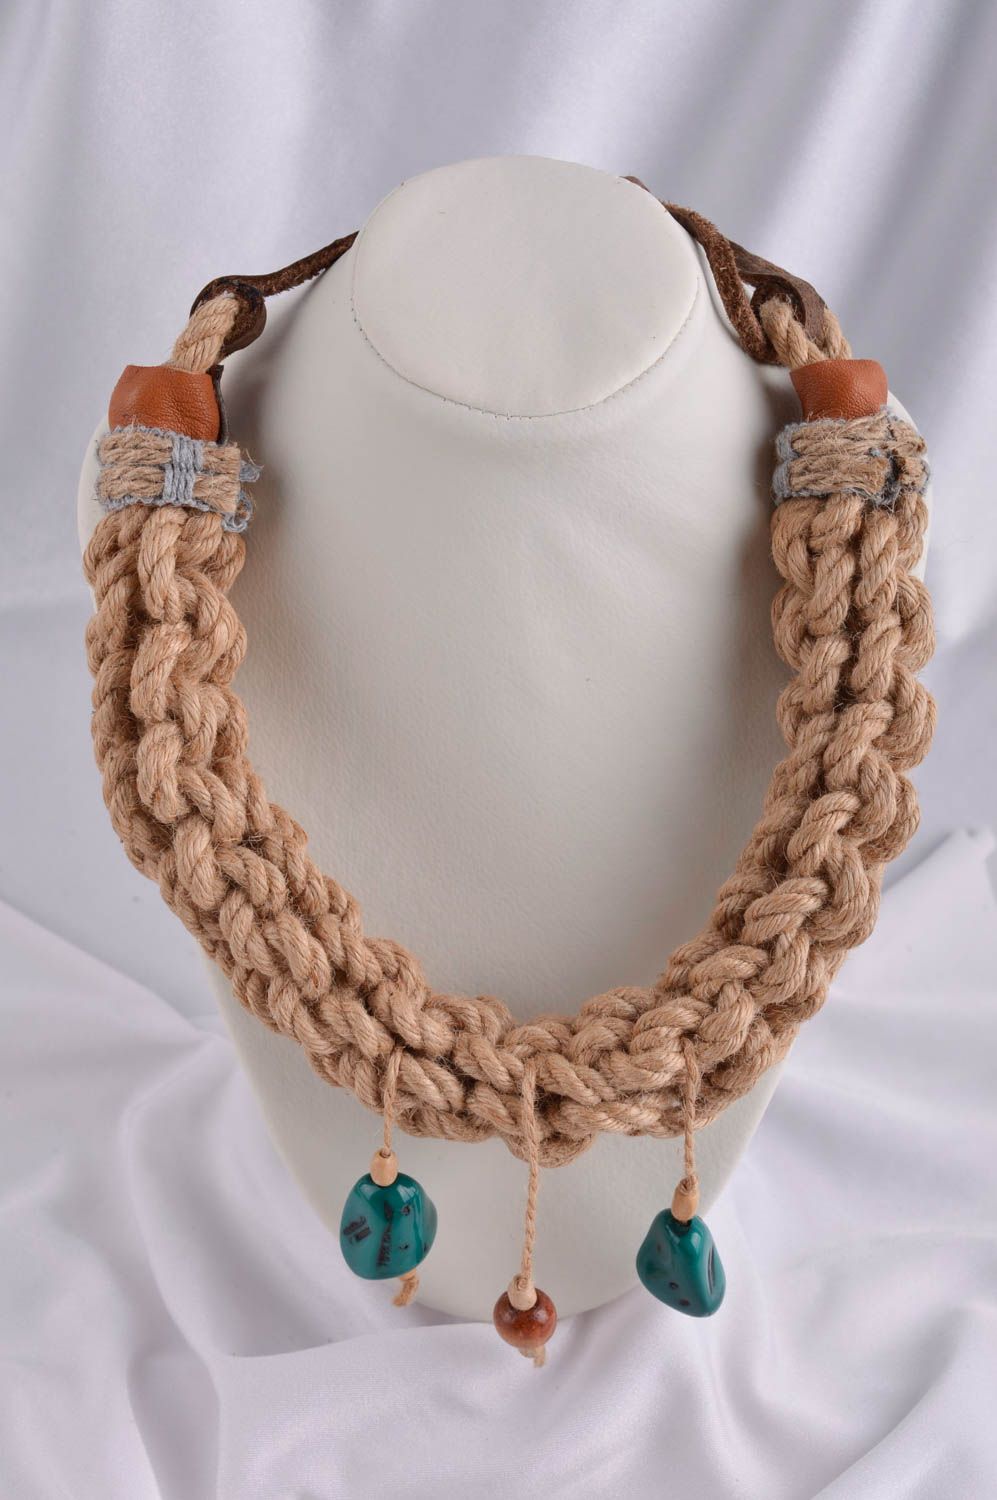 Woven necklace with charms handmade cord necklace modern jewelry for women photo 1